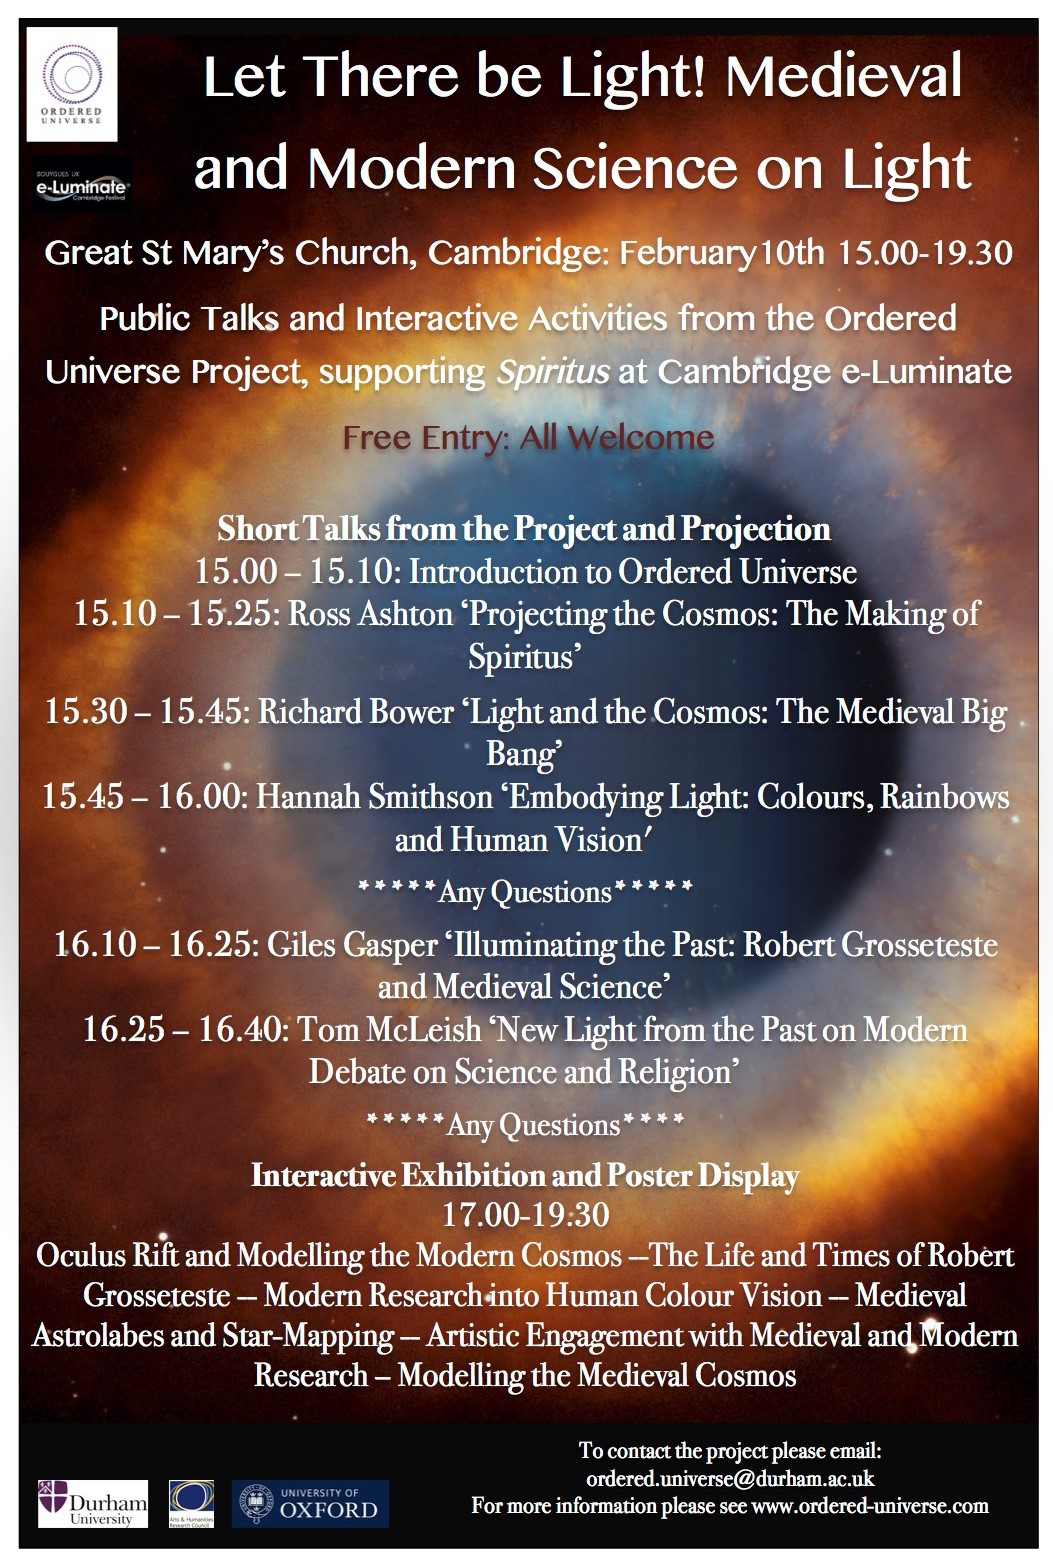 Public Talks and Interactive Activities from the Ordered Universe Project, supporting Spiritus at Cambridge e-Luminate